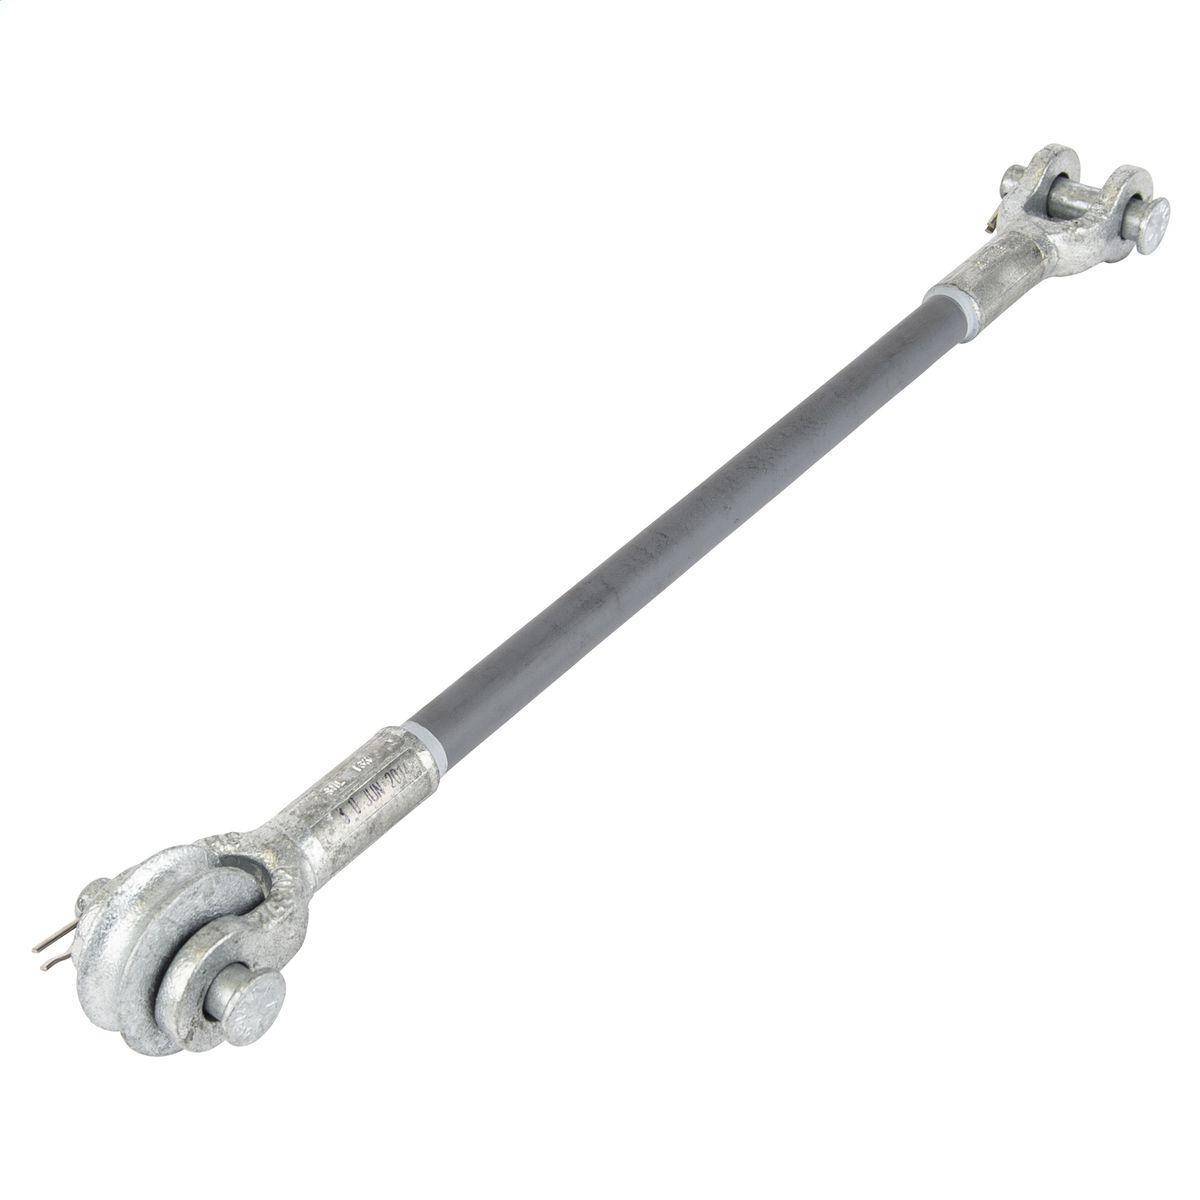 Hubbell GS21018CC1SC 18" Silicone Coated Fiberglass Guy Strain; 21,000 lb Series; Clevis / Clevis + 1 Roller 